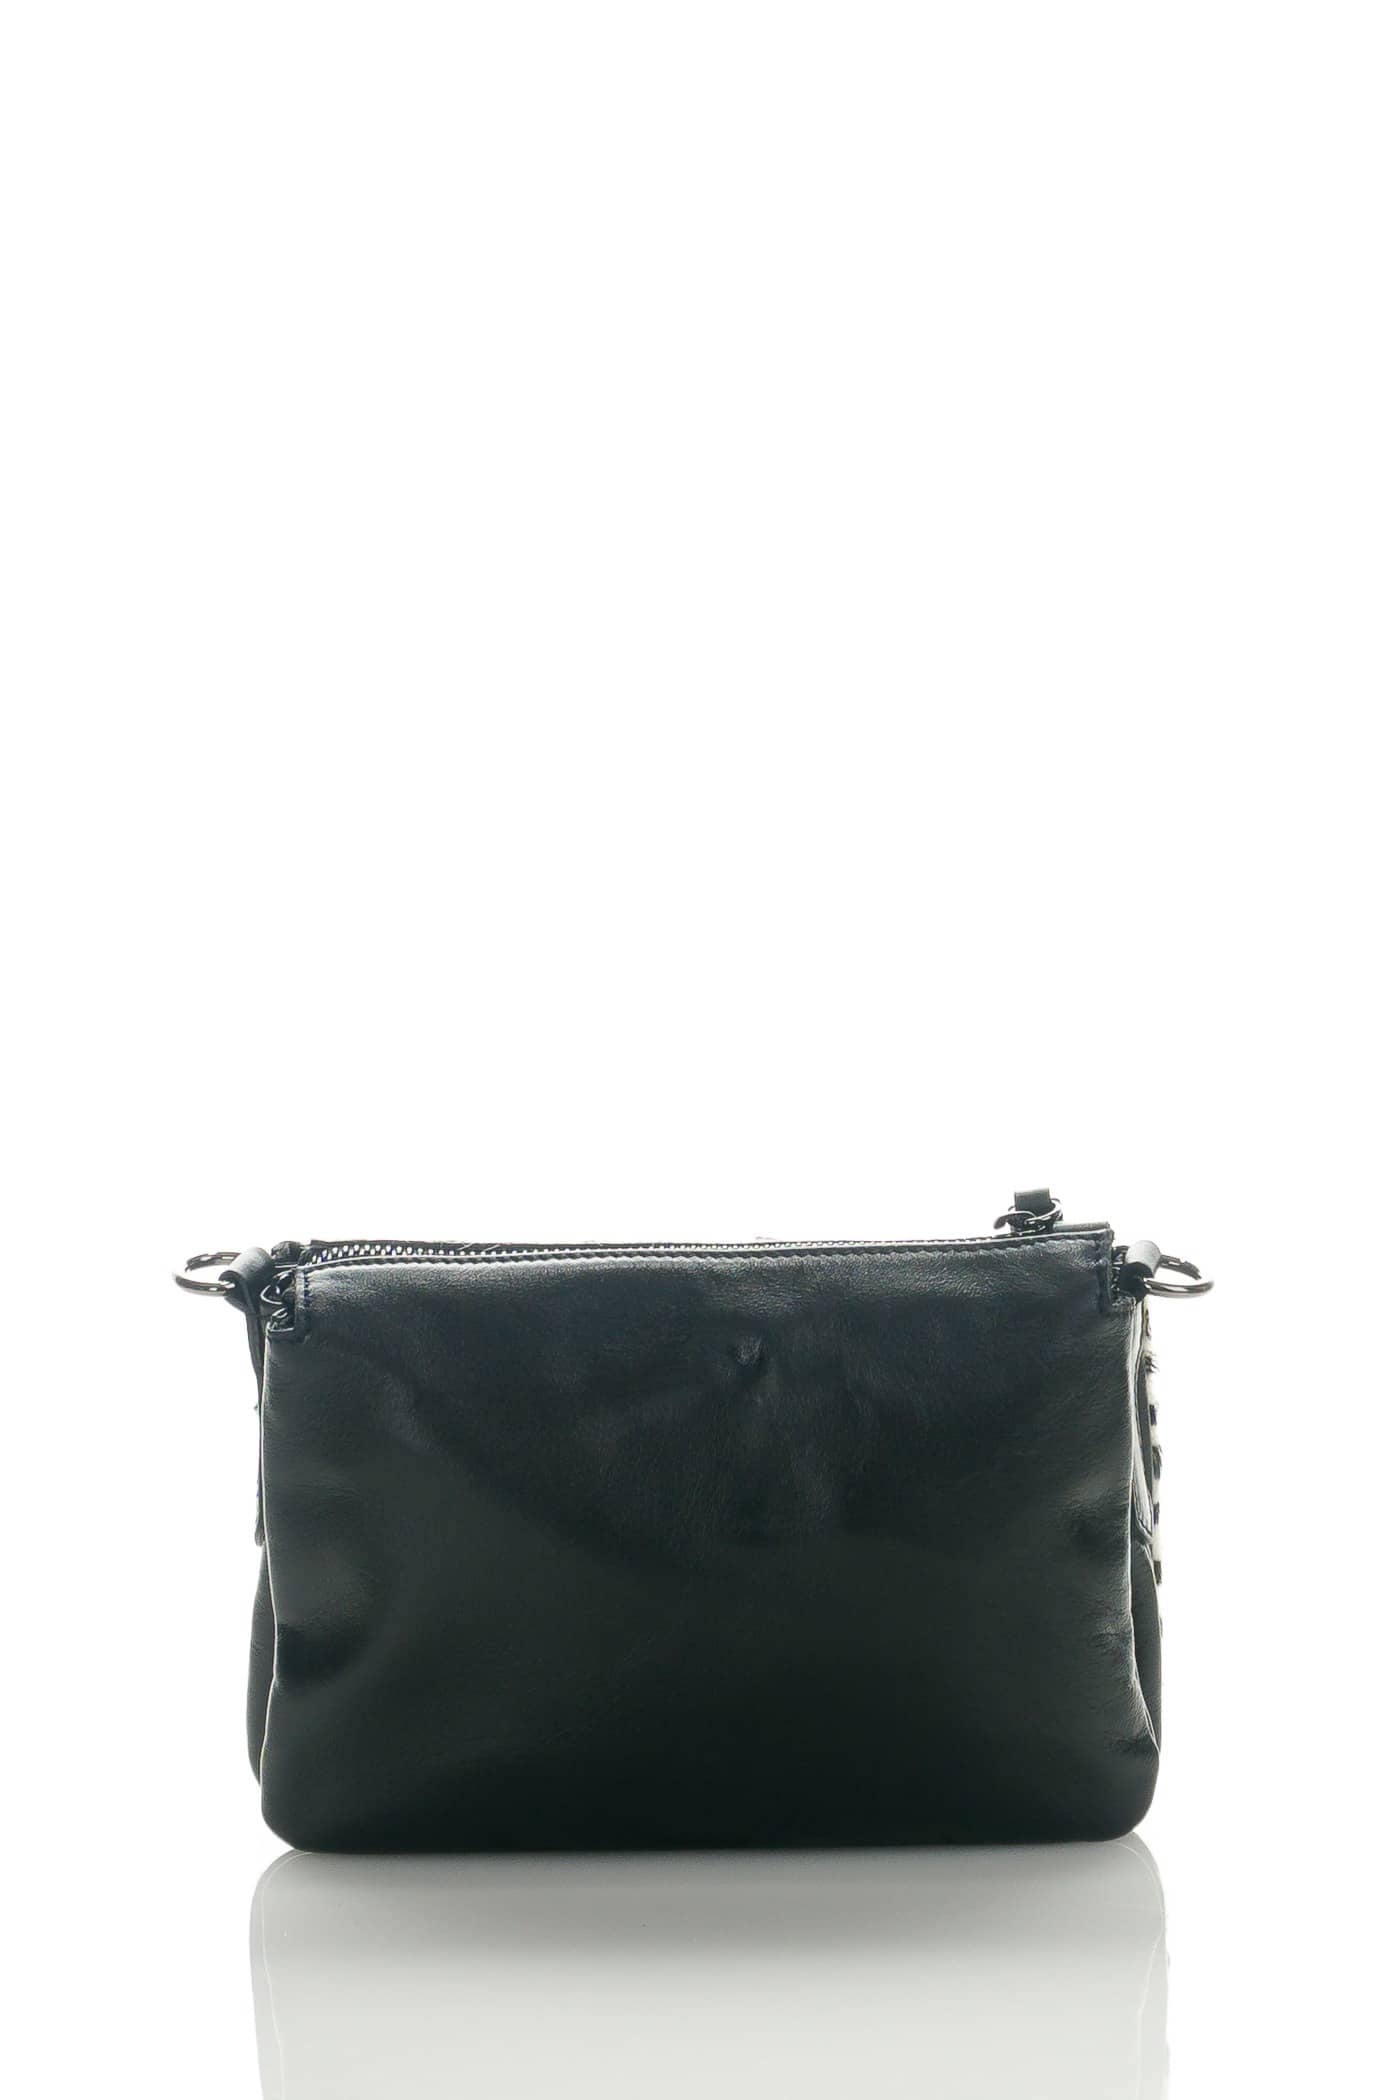 Clutch bag, real leather